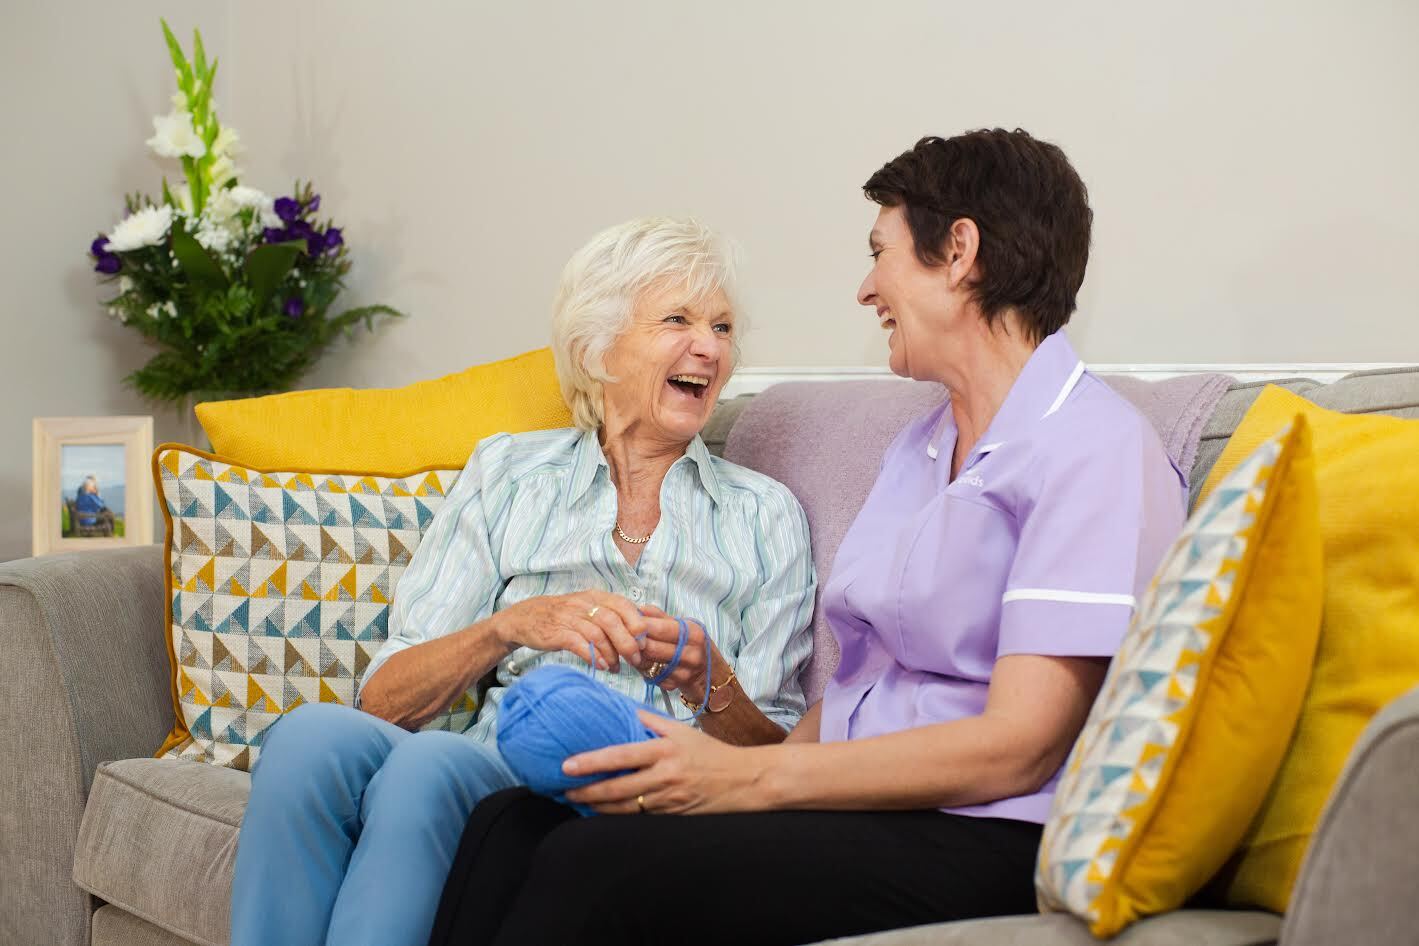 Dementia care from helping hands